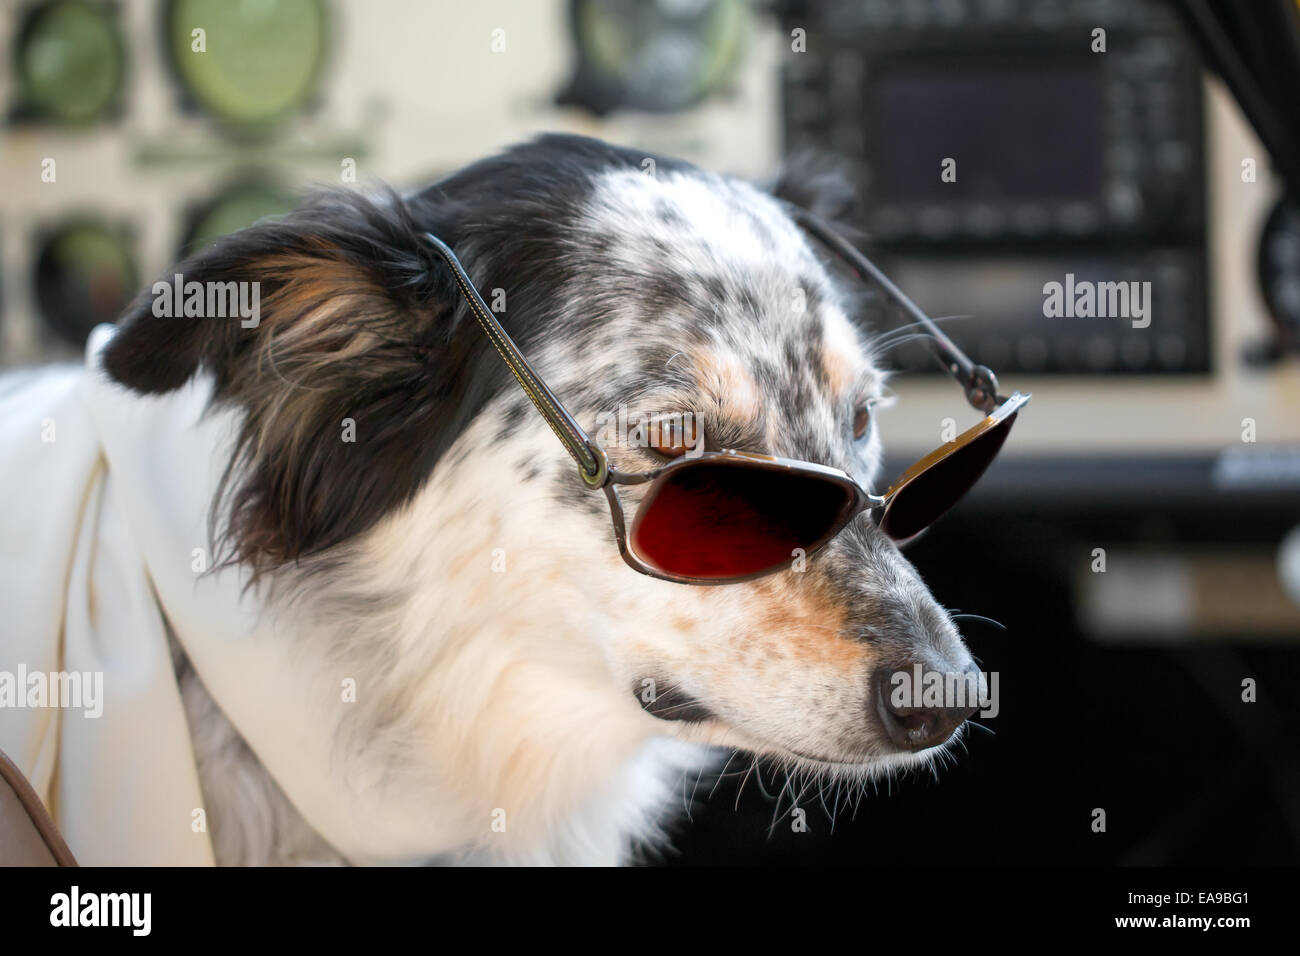 Border collie Australian shepherd mix dog sitting down with sunglasses in ariplane cockpit wearing white scarf looking smart cut Stock Photo